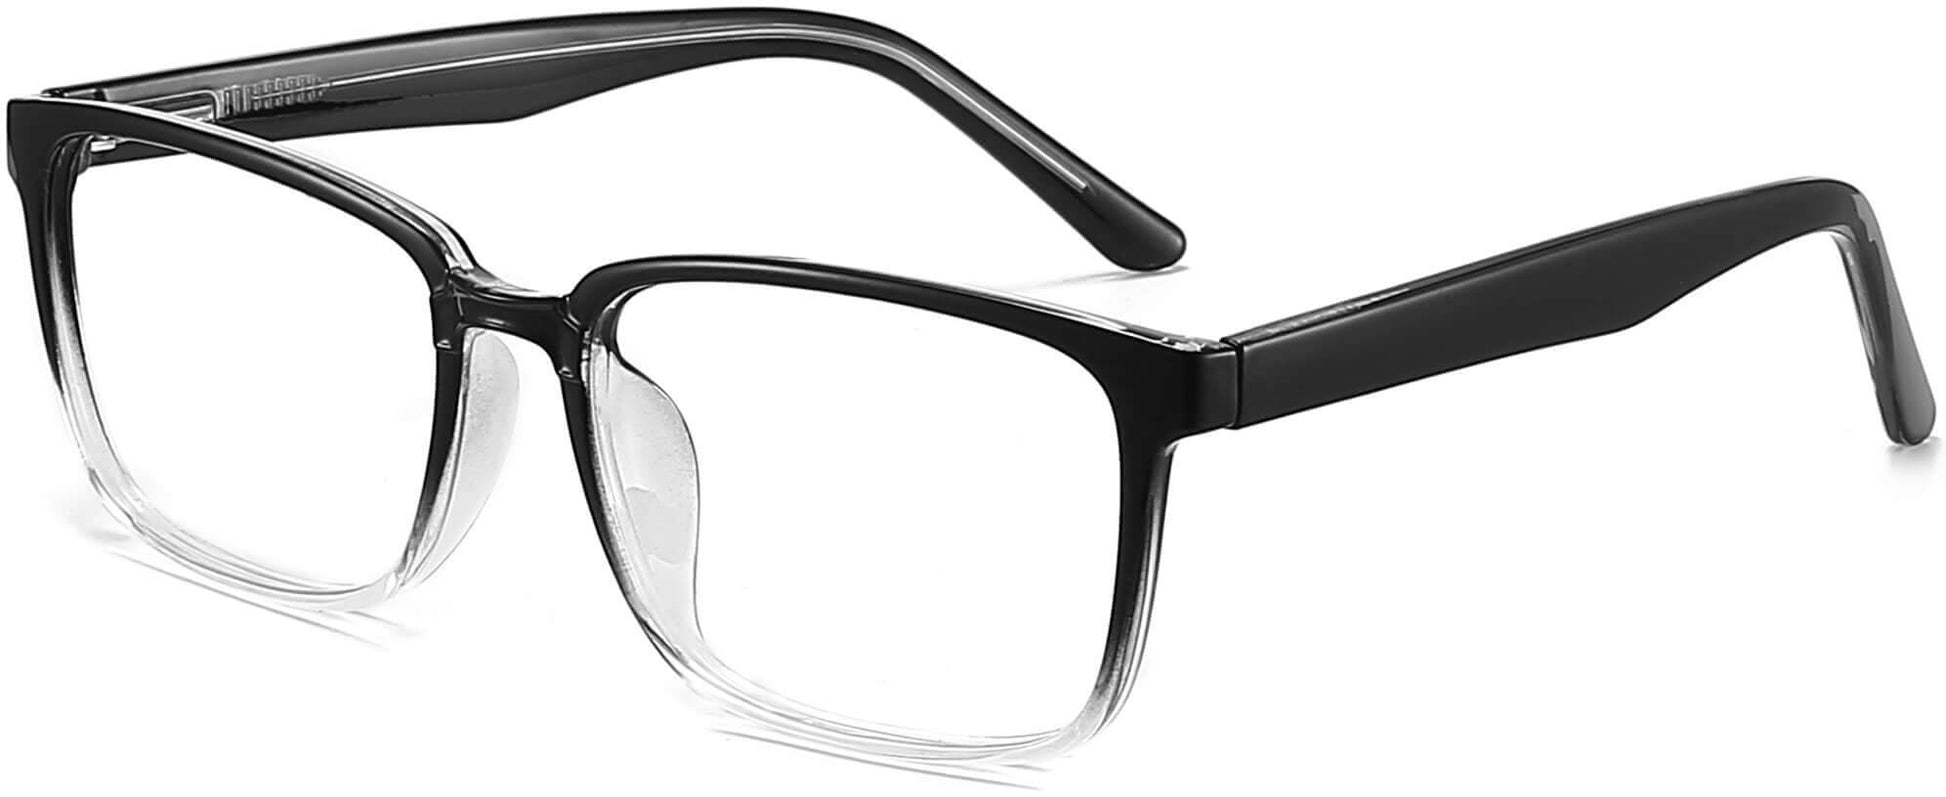 Ryland Square Black Eyeglasses from ANRRI, angle view